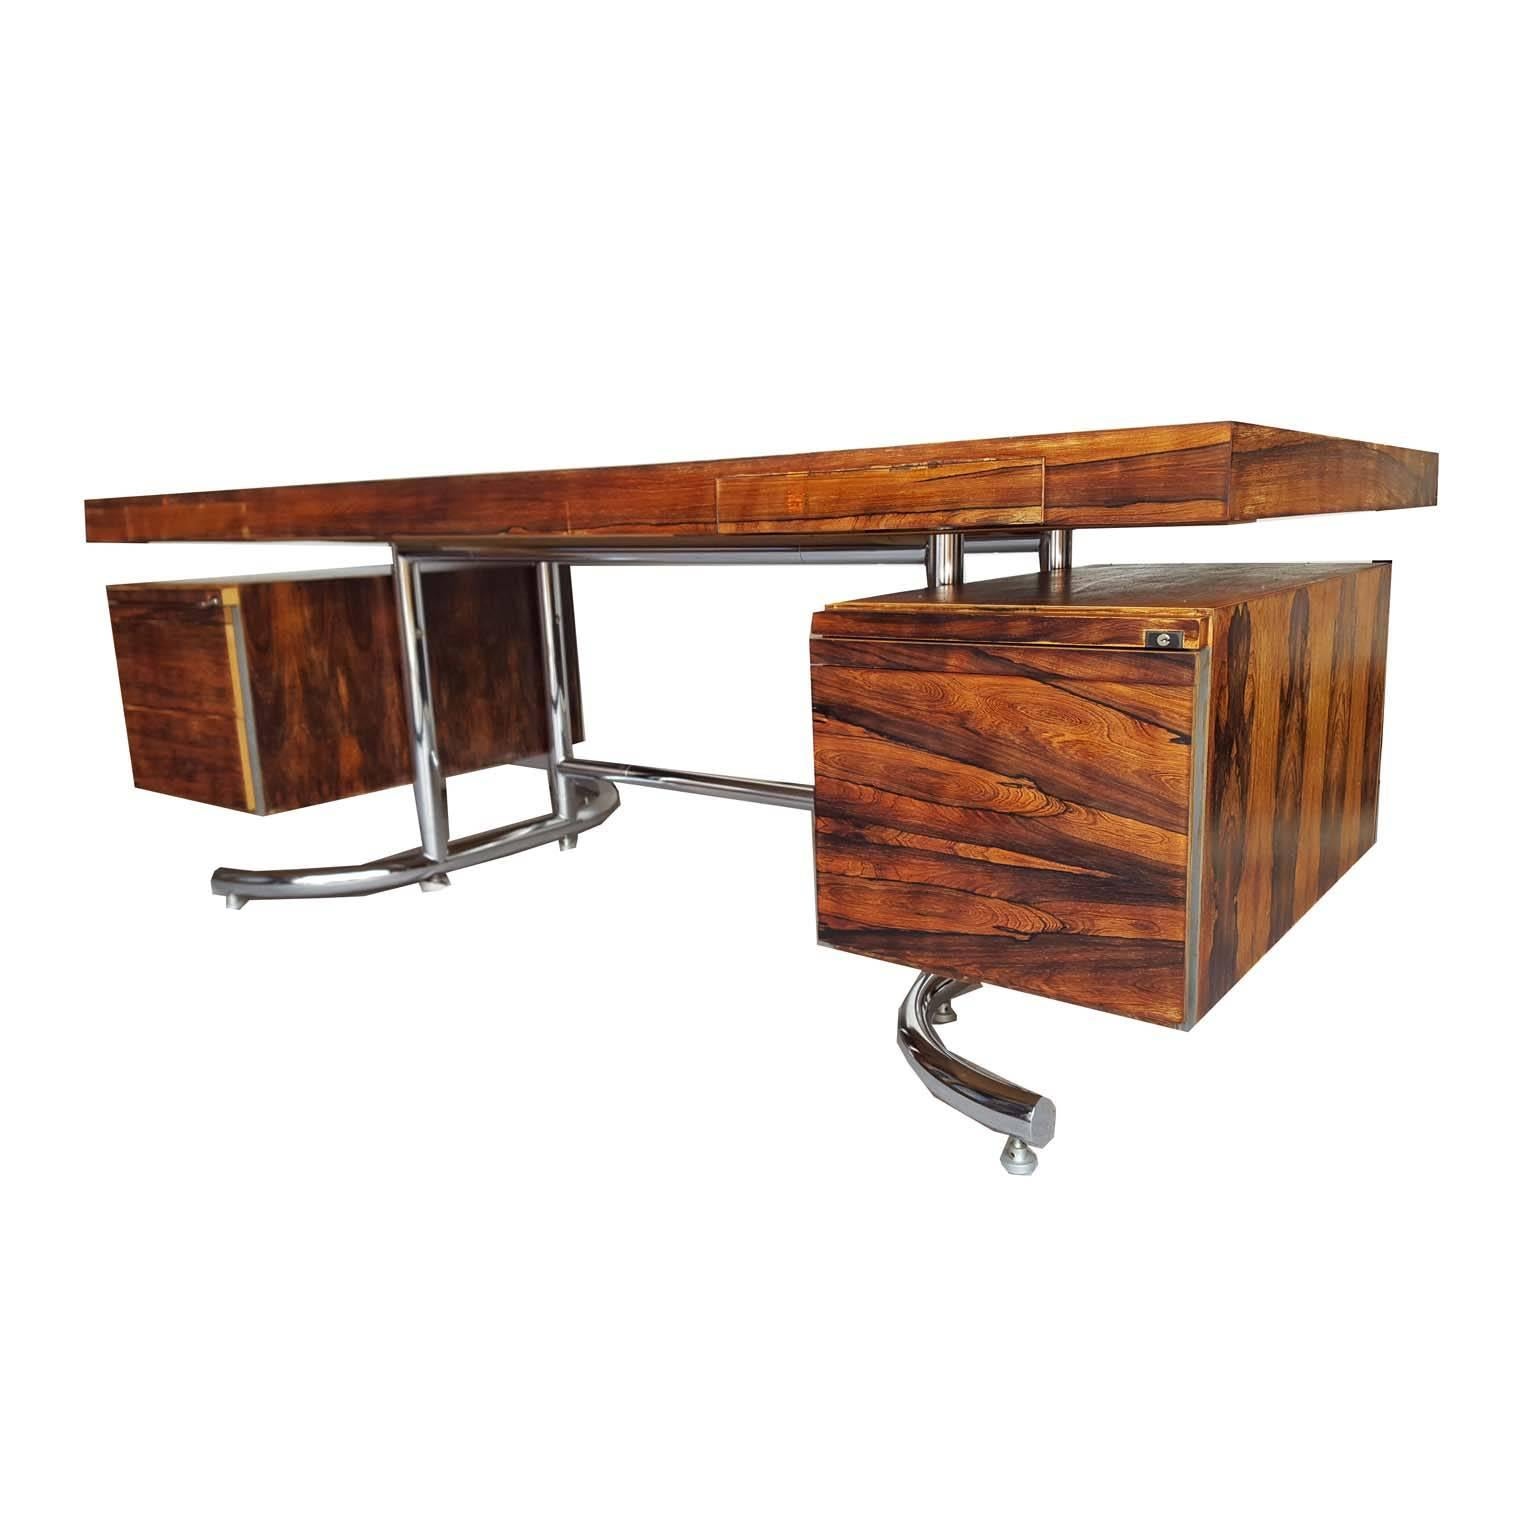 German Executive 1974 Office Desk Sets in Rosewood